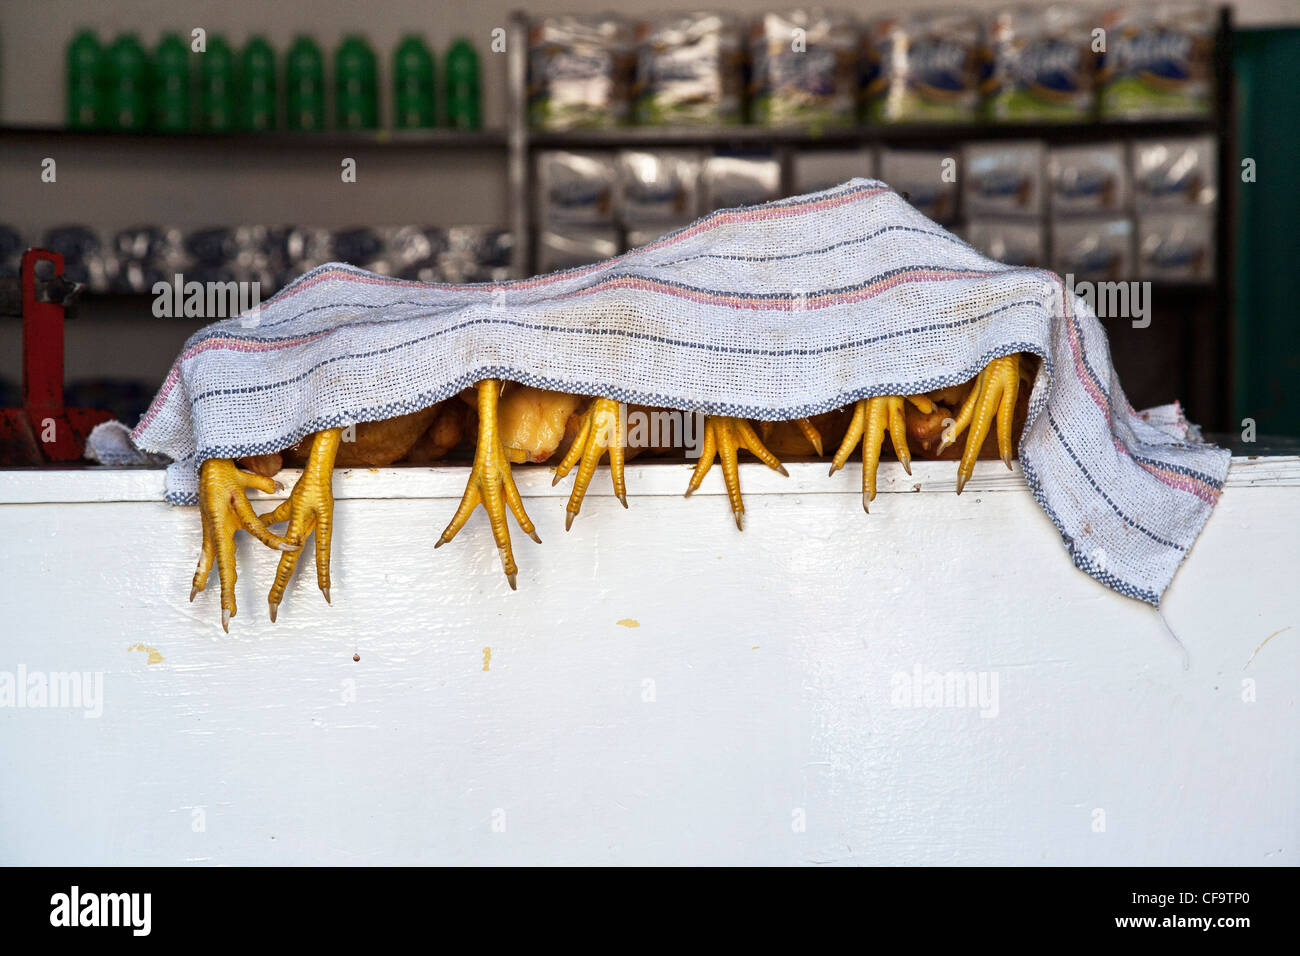 whole chicken chickens lined up on a counter for sale with feet elegantly dangling below cloth covering on hot day Oaxaca Mexico Stock Photo